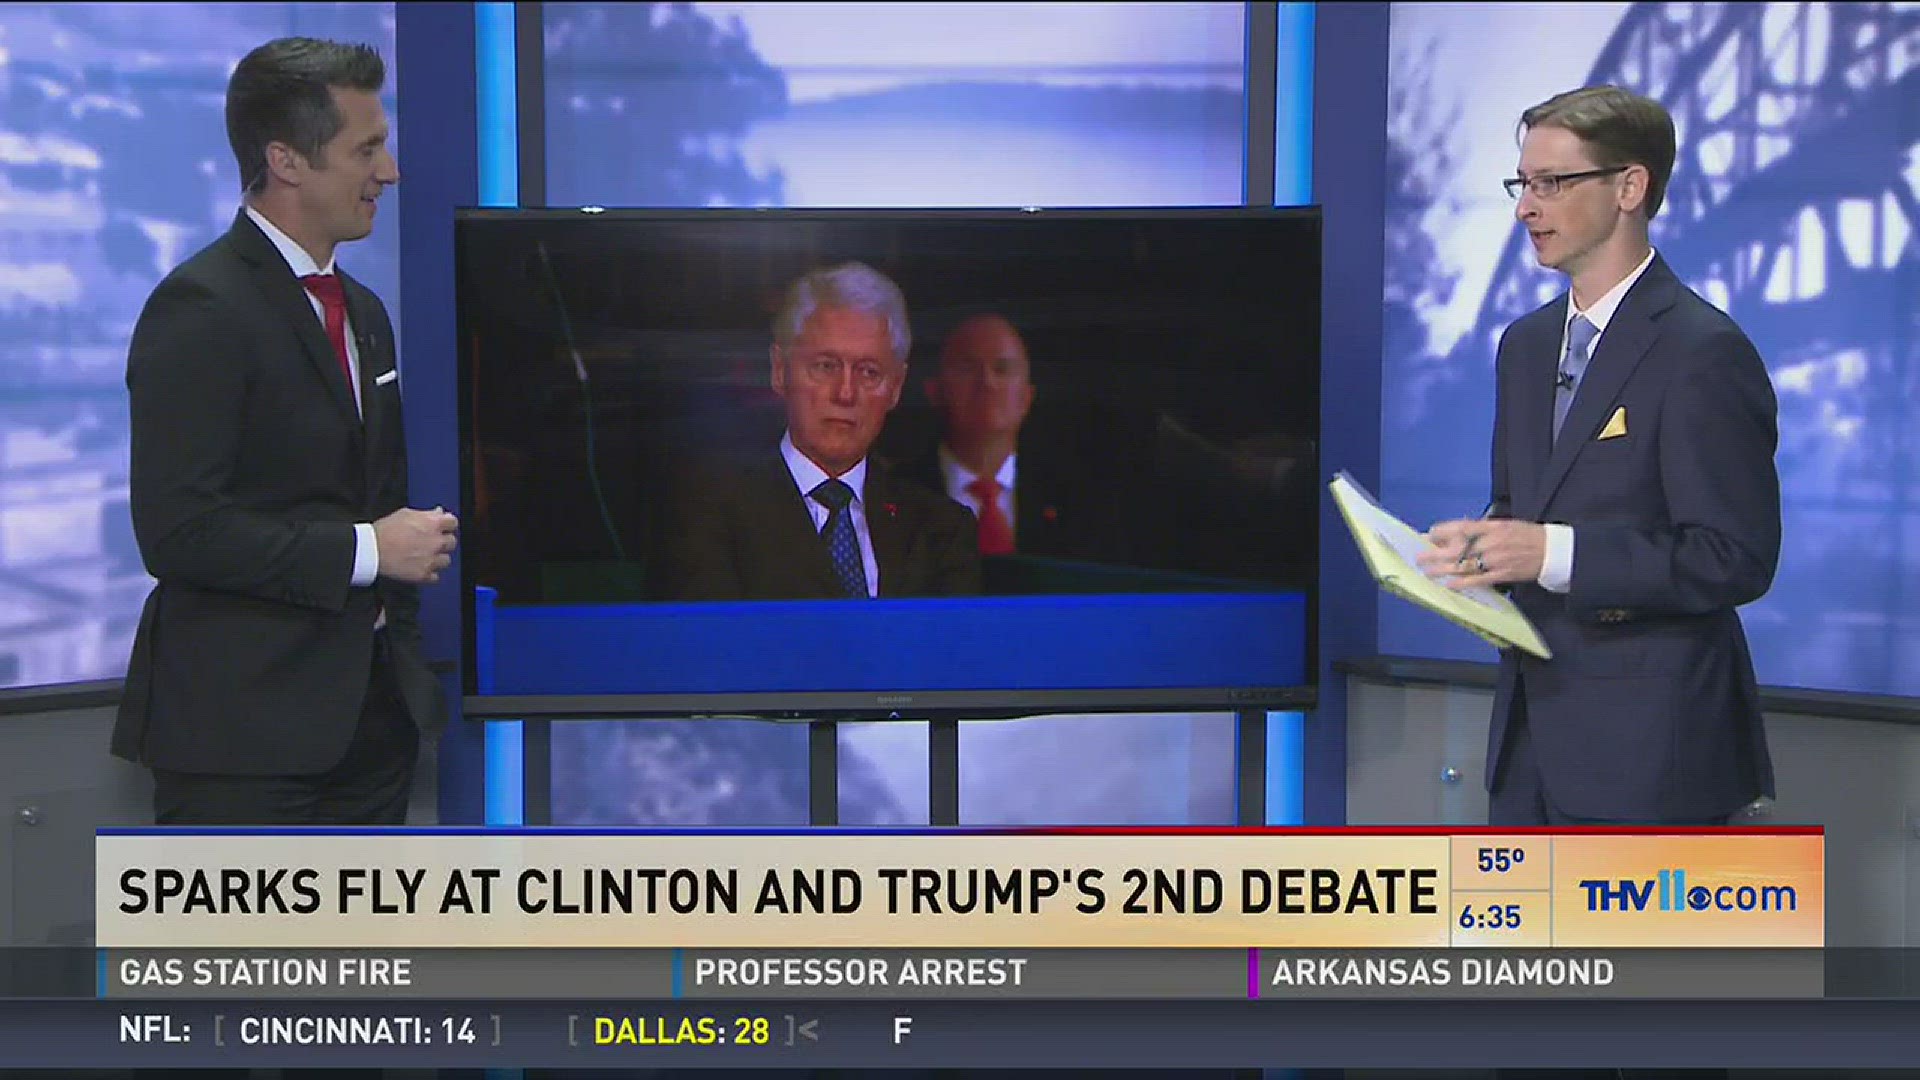 THV11's Rob Evans spoke with Lance Turner from Arkansas Business about the details of Sunday night's debate